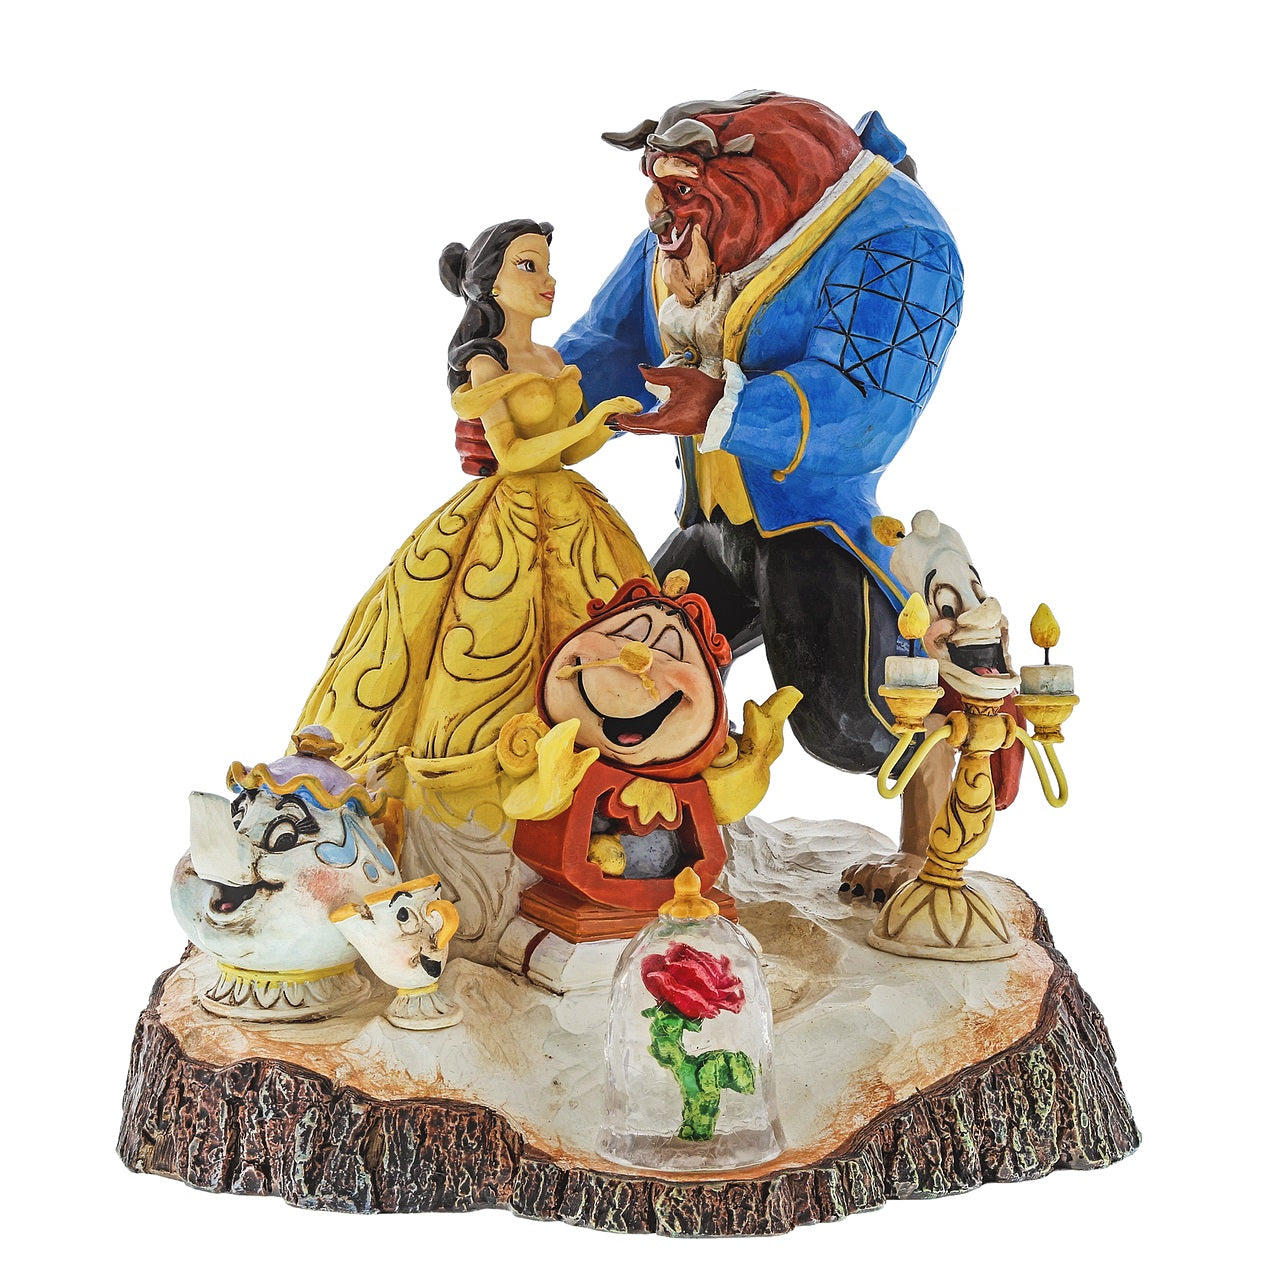 Jim Shore Disney Tale as Old as Time Carved by Heart Beauty and Beast Figurine  Jim Shore continues his Carved by Heart series paying homage to Beauty and the Beast. All 6 of the beloved characters are represented in this log hewn sculpture. Designed by award-winning artist and sculptor, Jim Shore for the Disney Tradition brand.